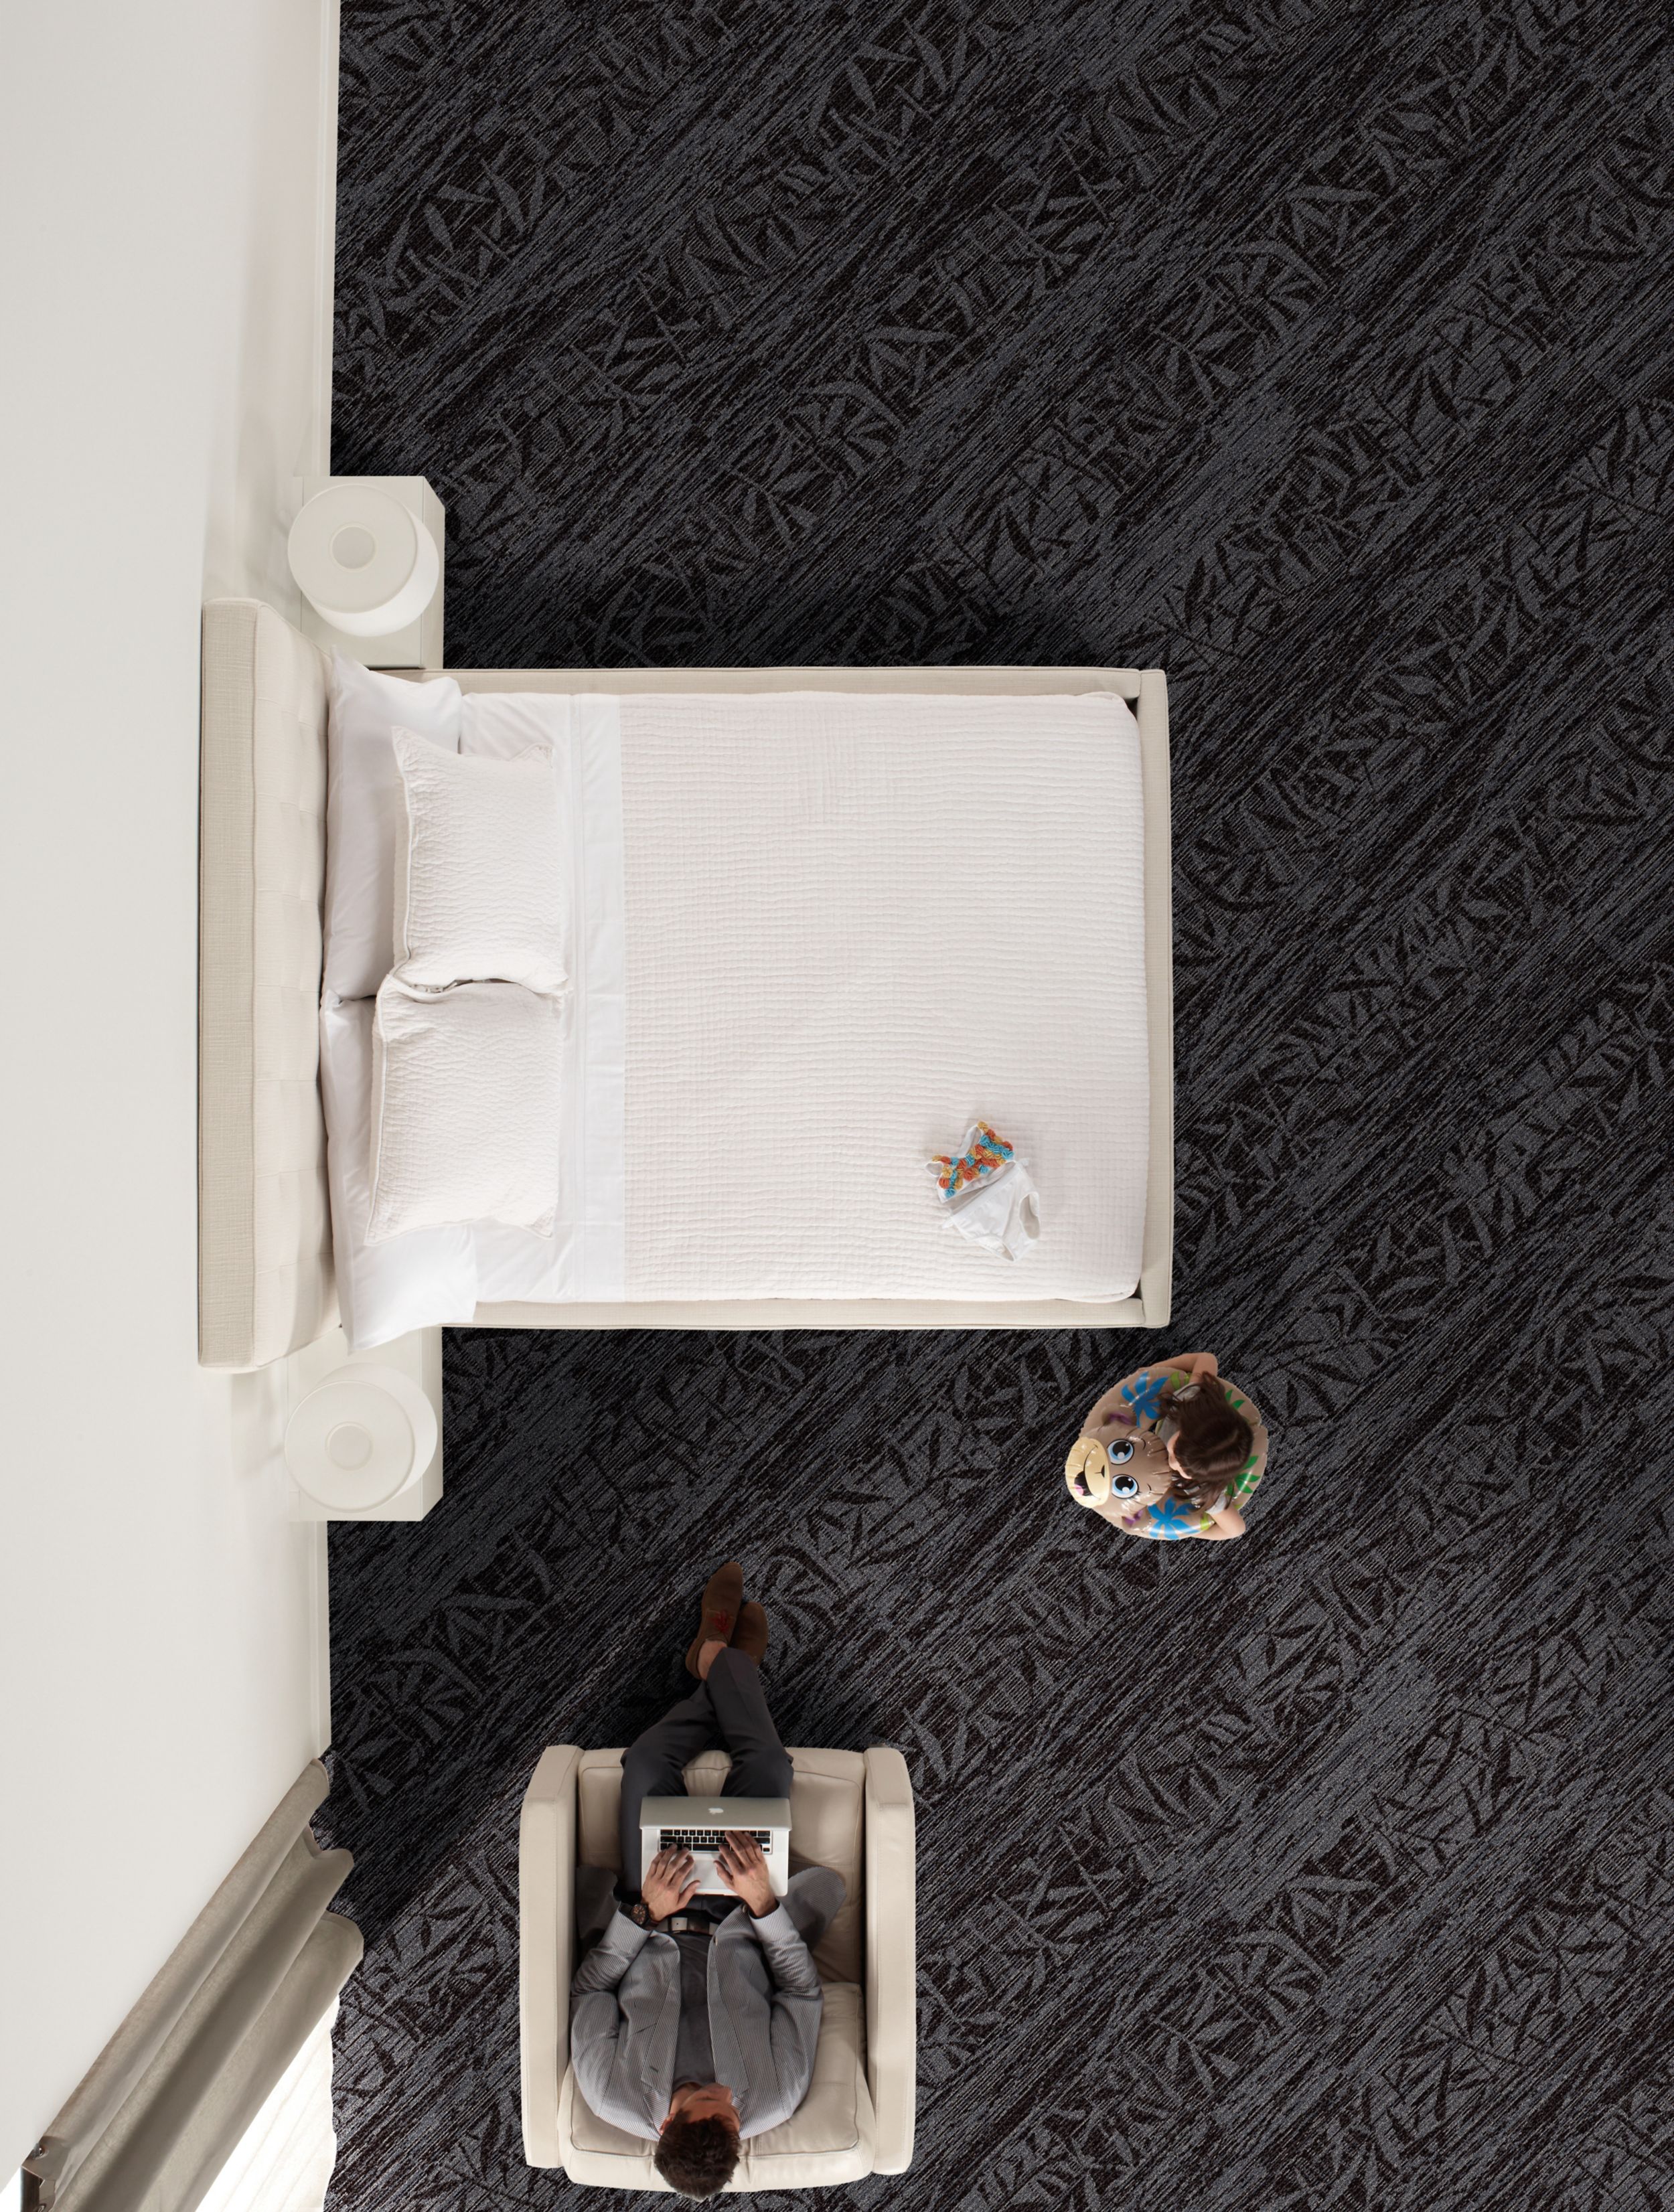 Interface RMS 507 and RMS 508 plank carpet tile in hotel guest room with woman on computer and girl holding stuffed animal numéro d’image 8